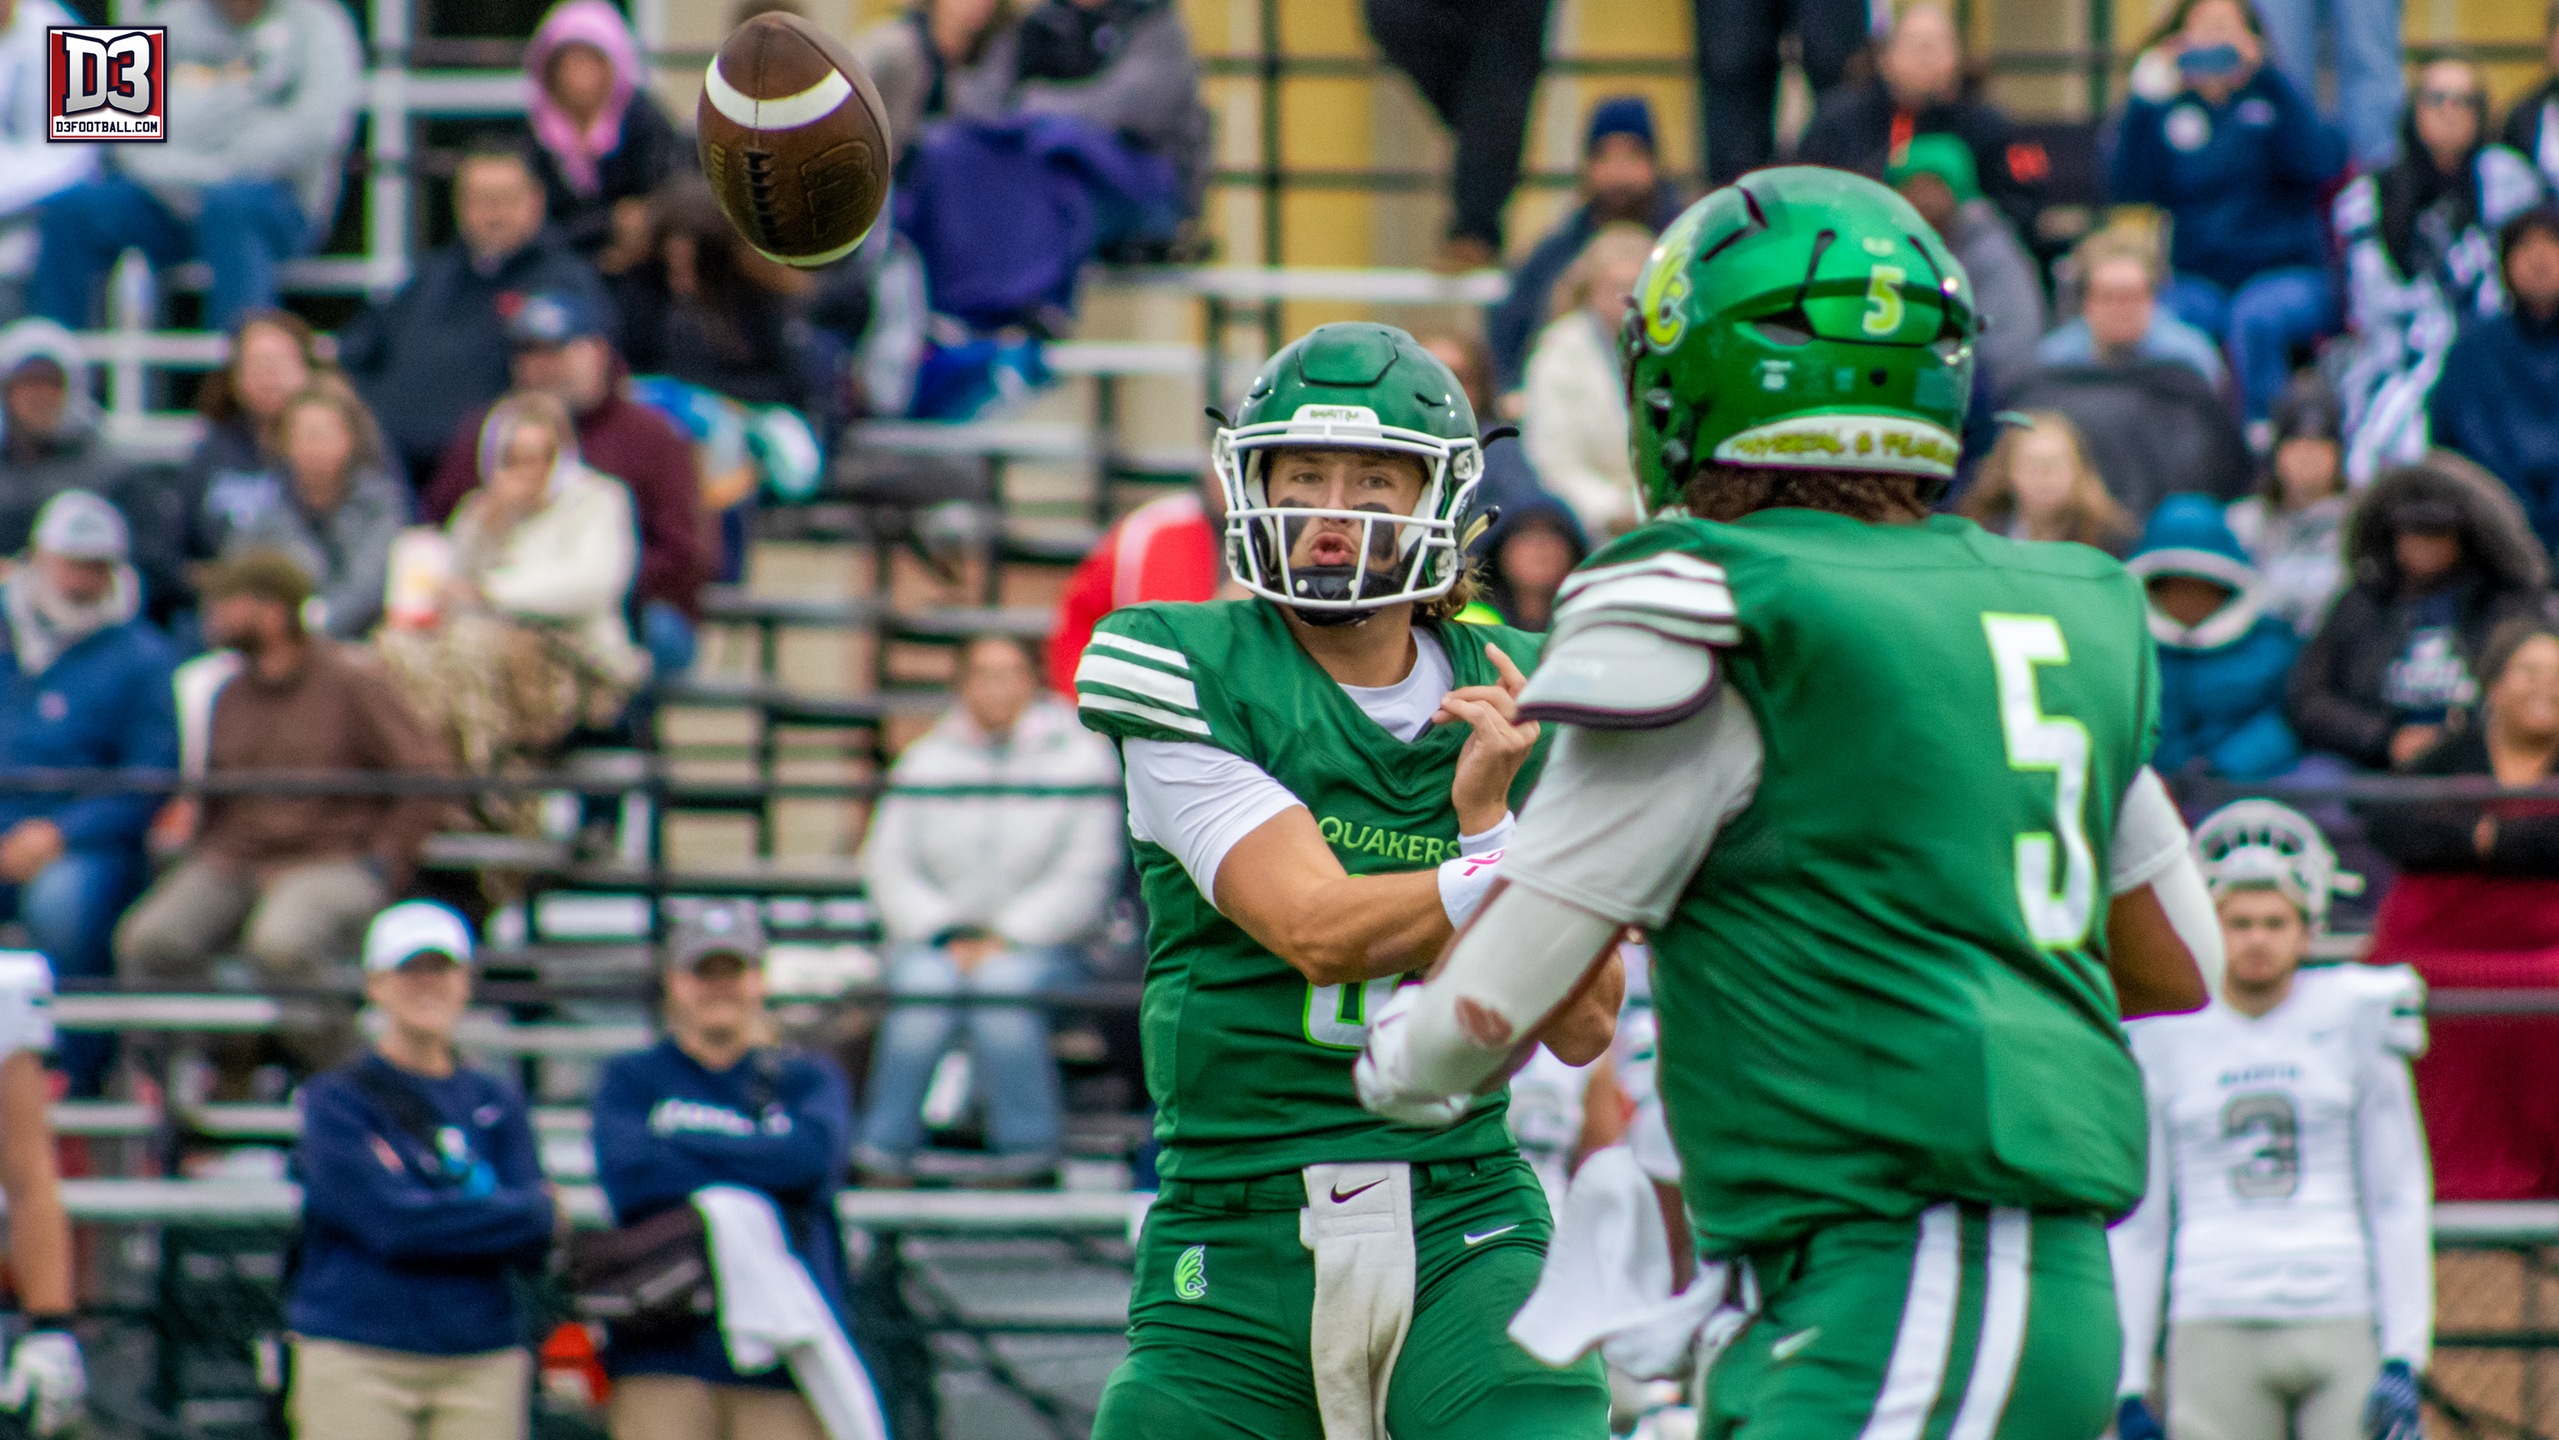 Larimer Named to D3football.com Team of the Week for First Time in his Career